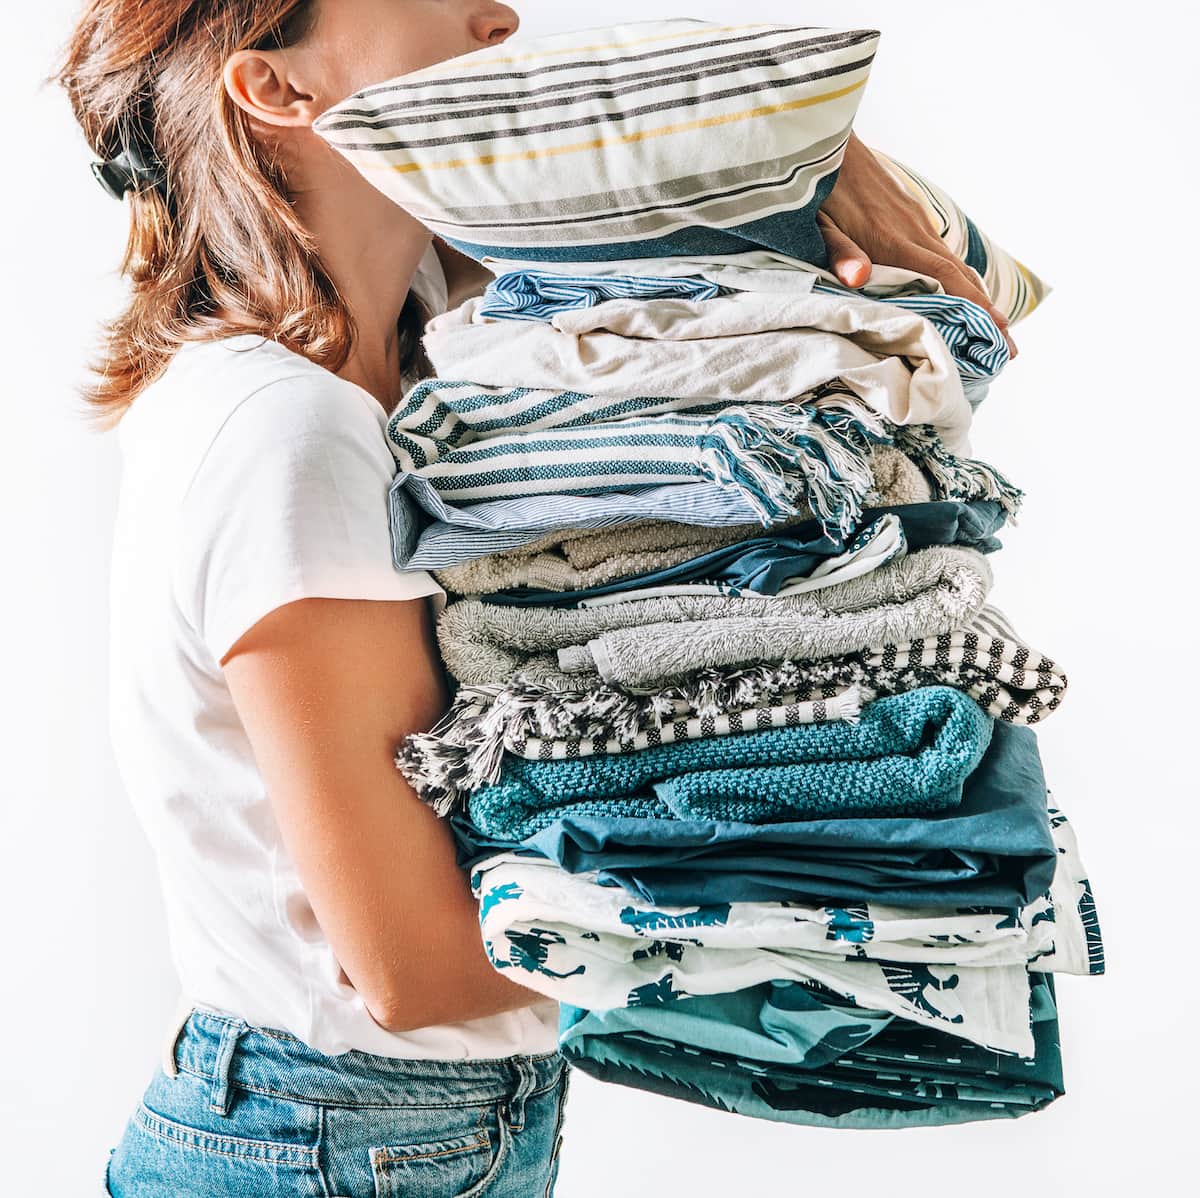 A woman purging her home and wardrobe of too much clutter